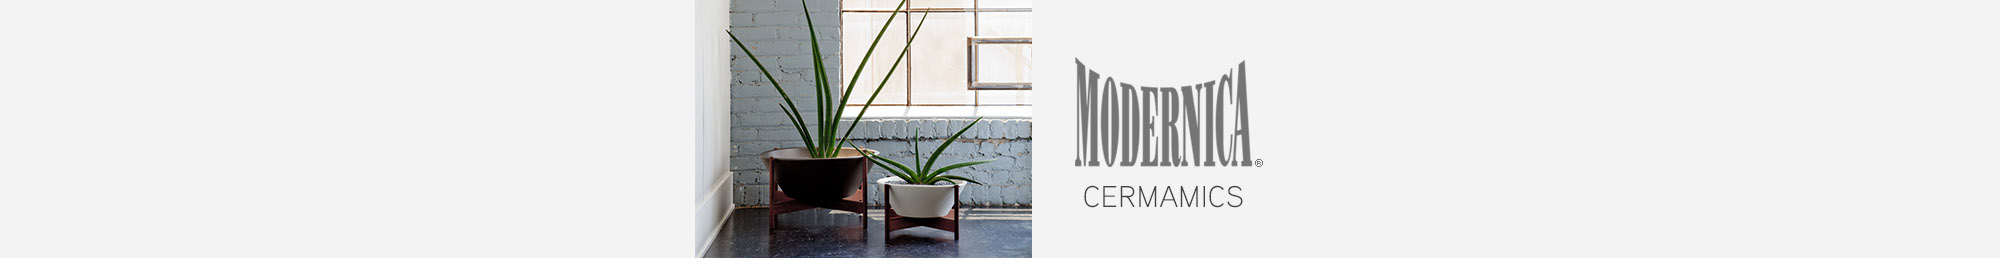 modernica-collection-cermamics